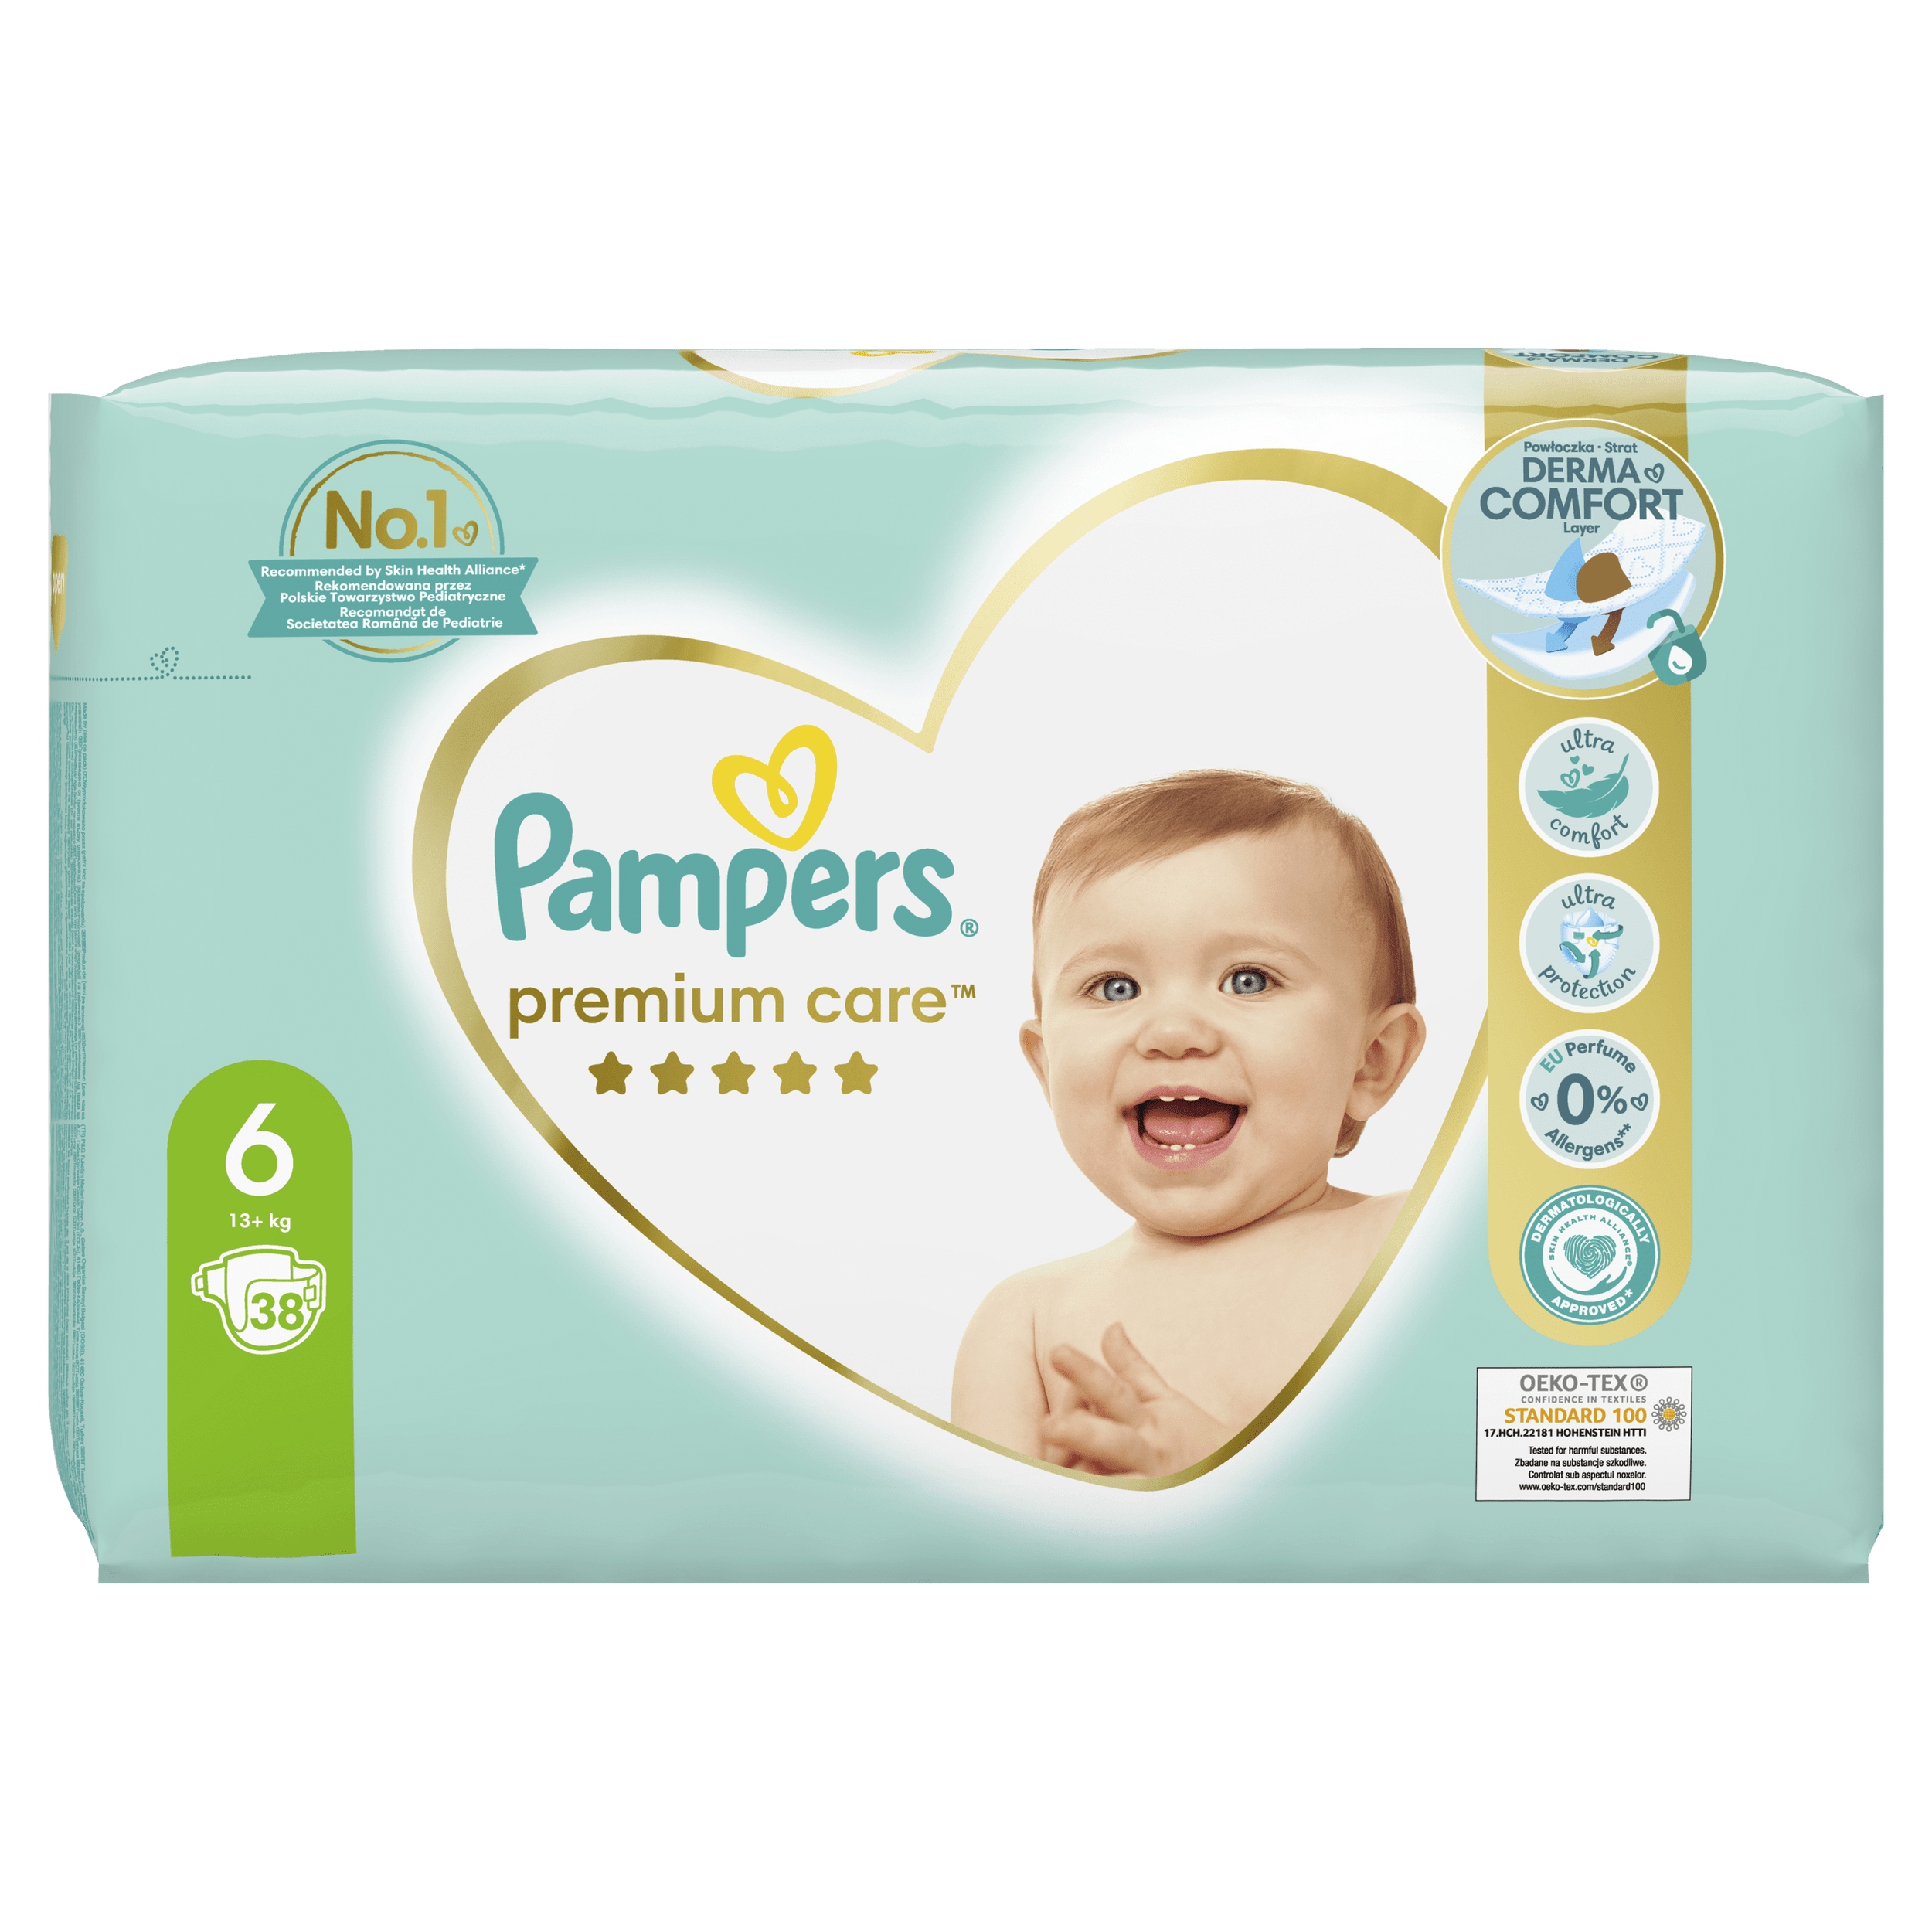 pants pampers 4